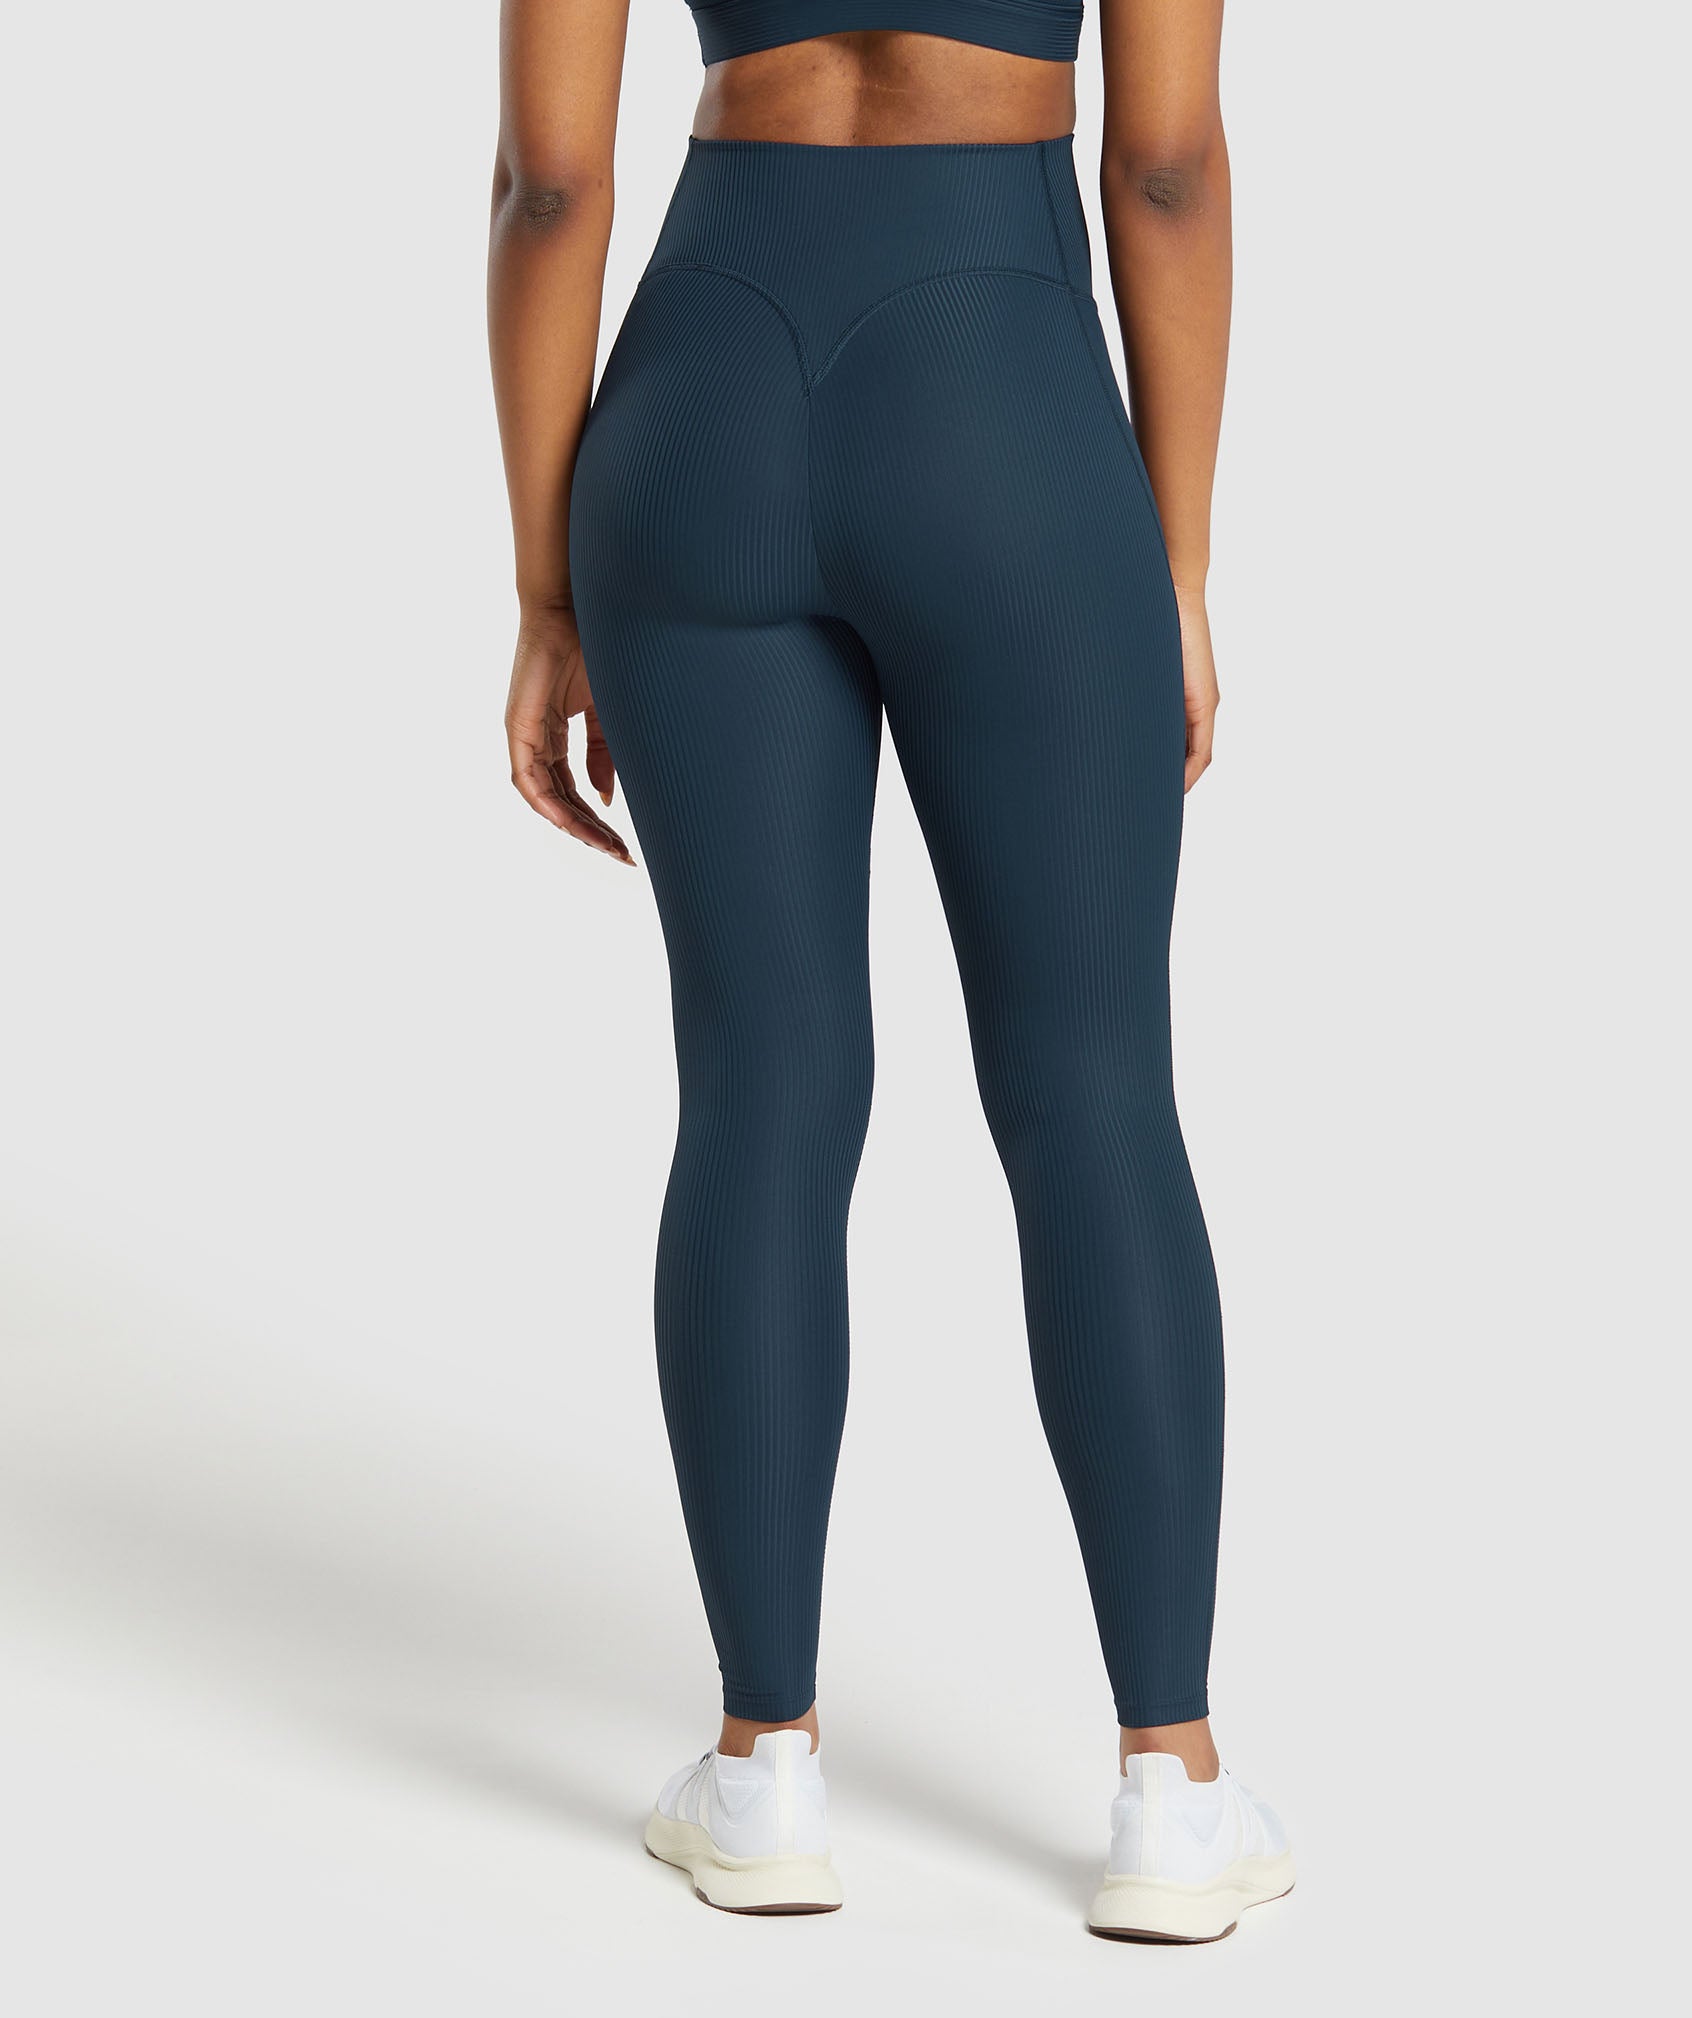 New Fabletics Lrg 10 Blue Crushed Velour High Waist Crossover